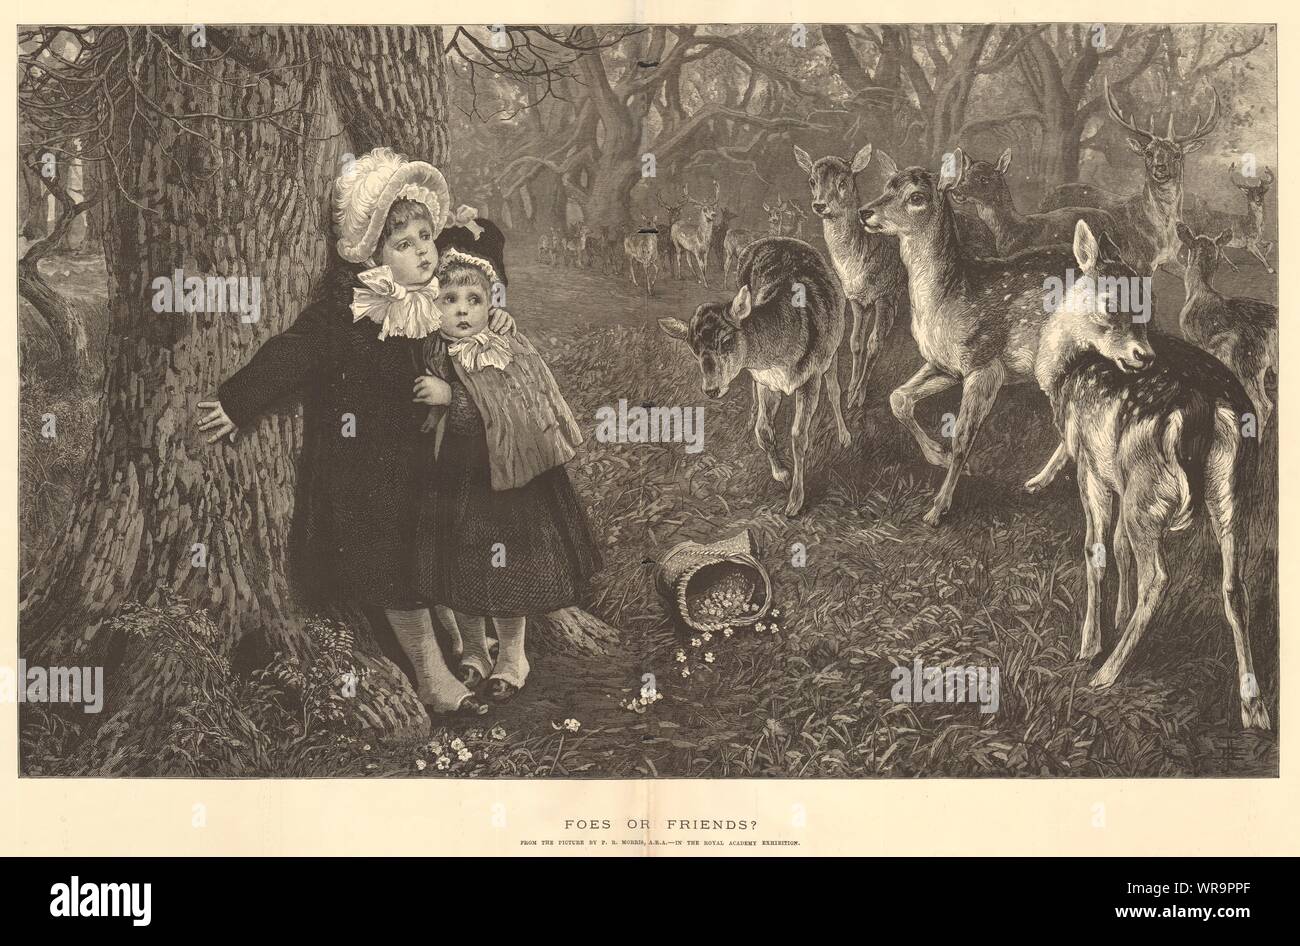 or friends? by P. R. Morris, A. R. A. Children. Deer 1883 ILN full page Stock Photo - Alamy